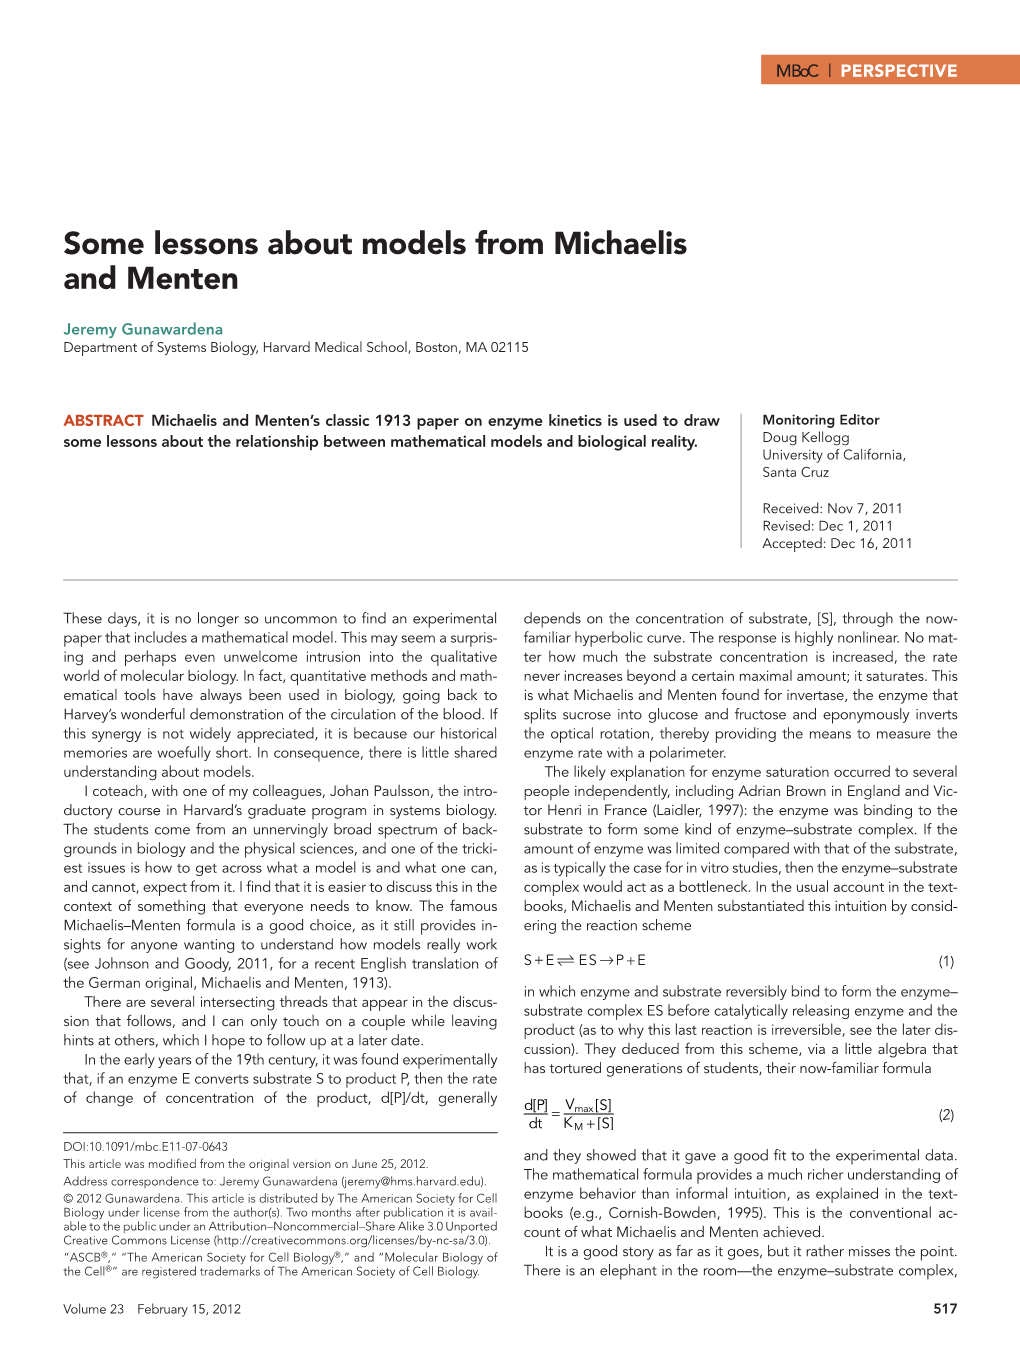 Some Lessons About Models from Michaelis and Menten